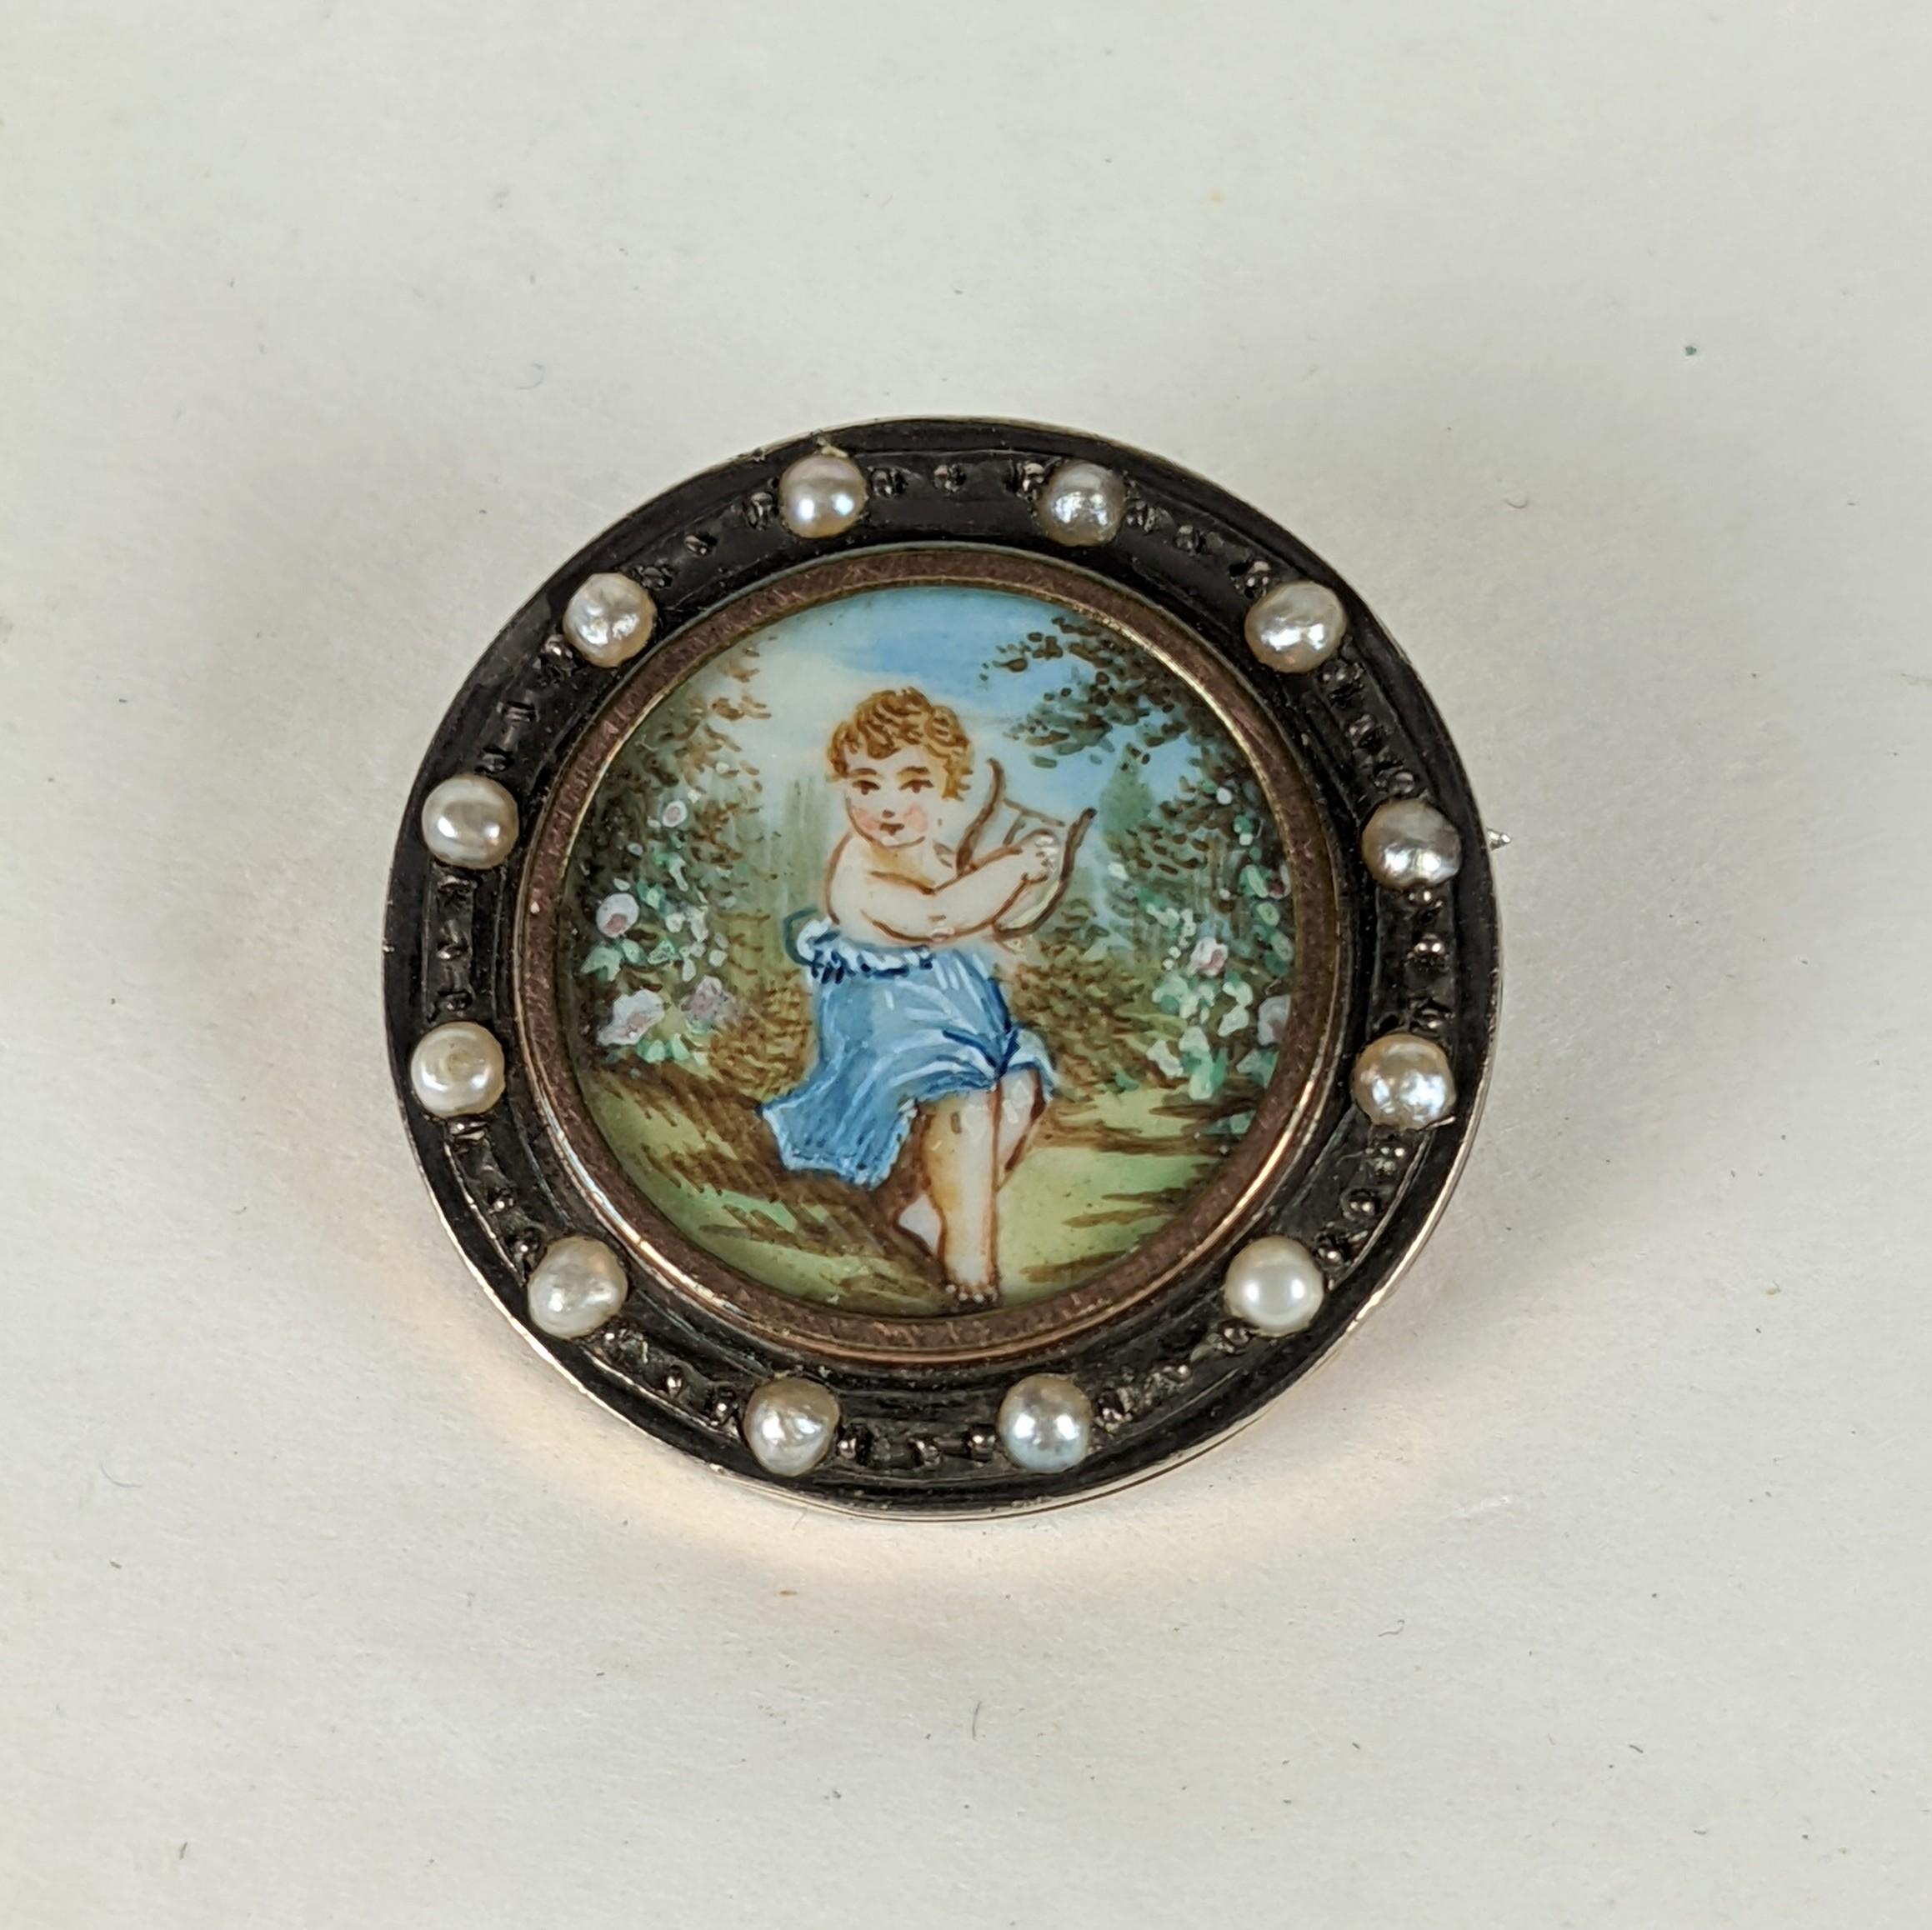 Charming Victorian Painted Miniature Brooch with a surround of half pearls. A finely painted miniature watercolor of a young child playing a harp in the woods is set under glass. The pearls are set in silver and the backing is gold filled metal. 